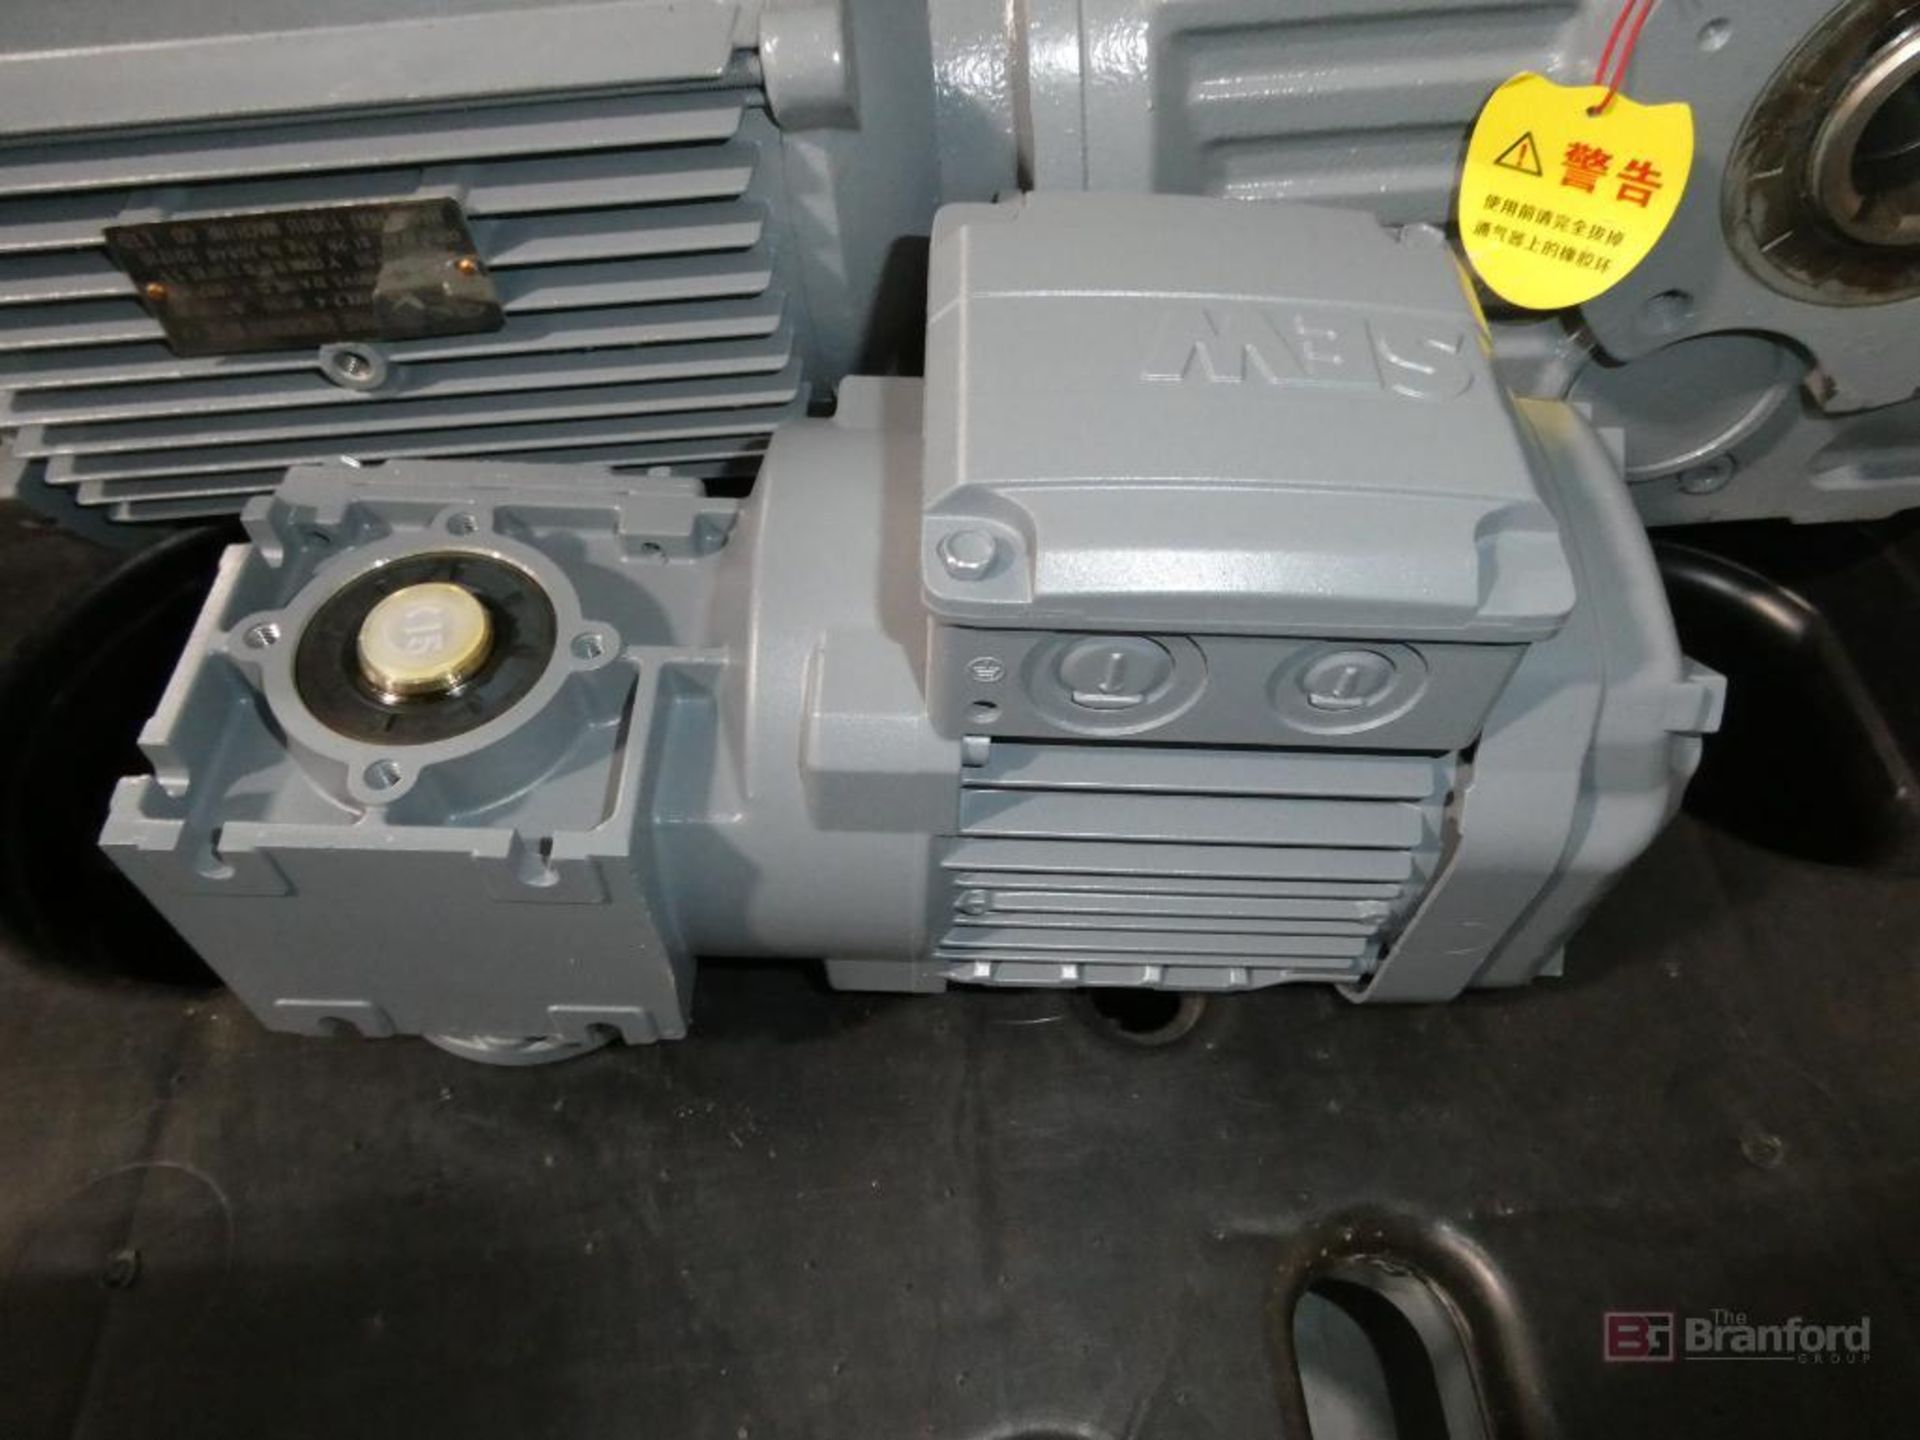 EverGear Model MTJAF67-Y2.2-4P-28-M5A, Gearbox Speed Reducer, Assorted Gear Motors - Image 8 of 10